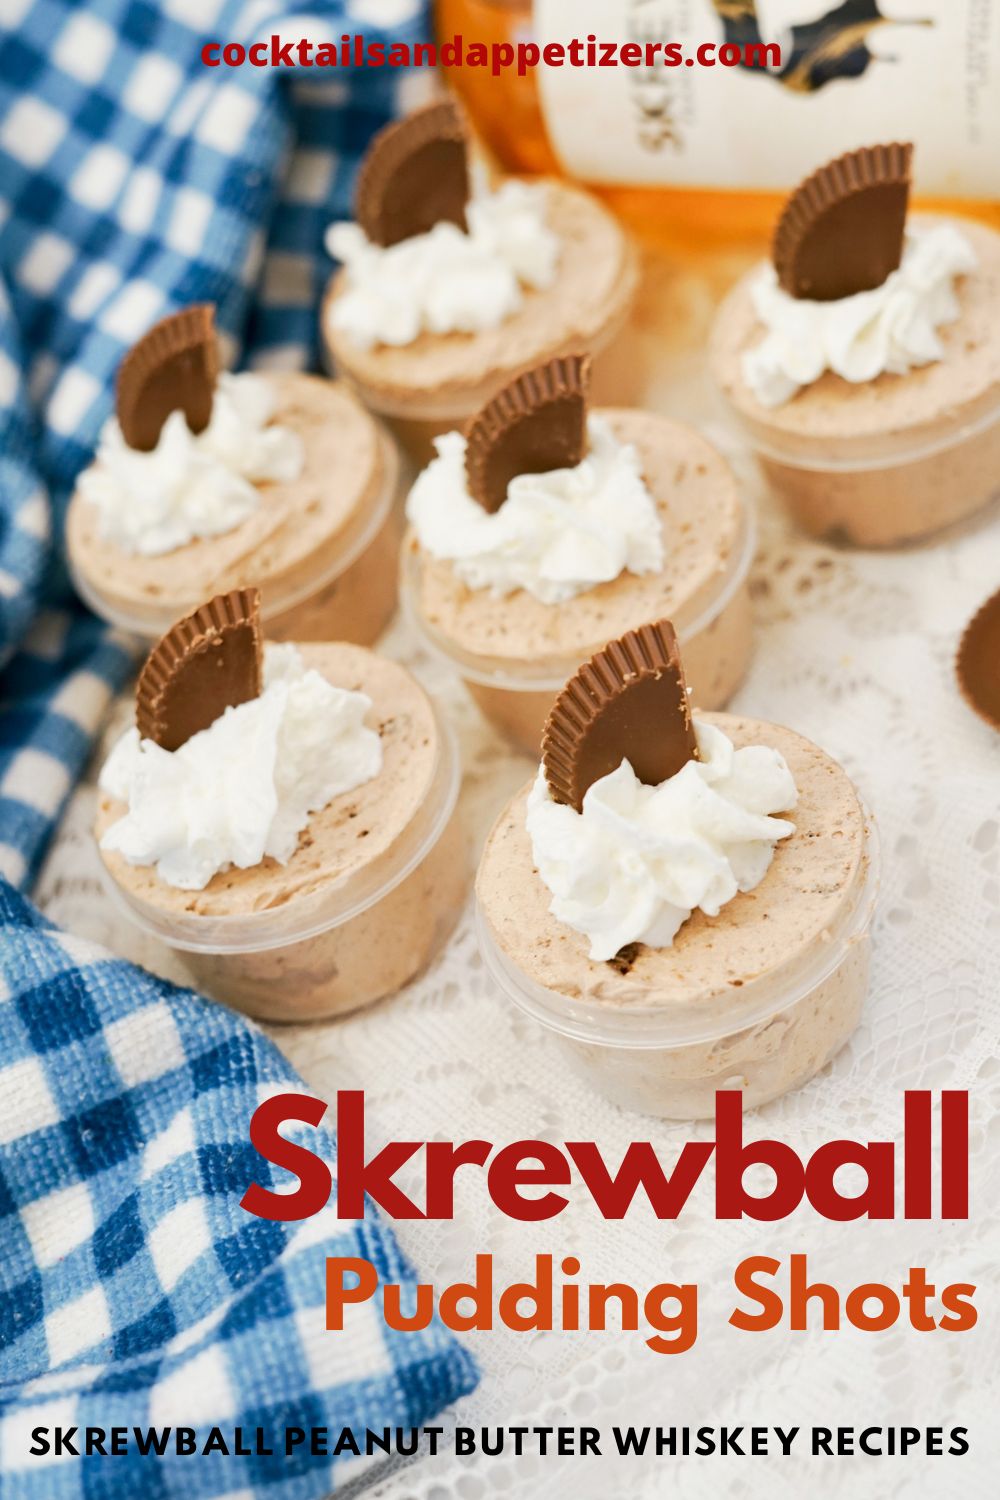 Skrewball pudding shots in small cups garnished with whipped cream and mini peanut butter cups.